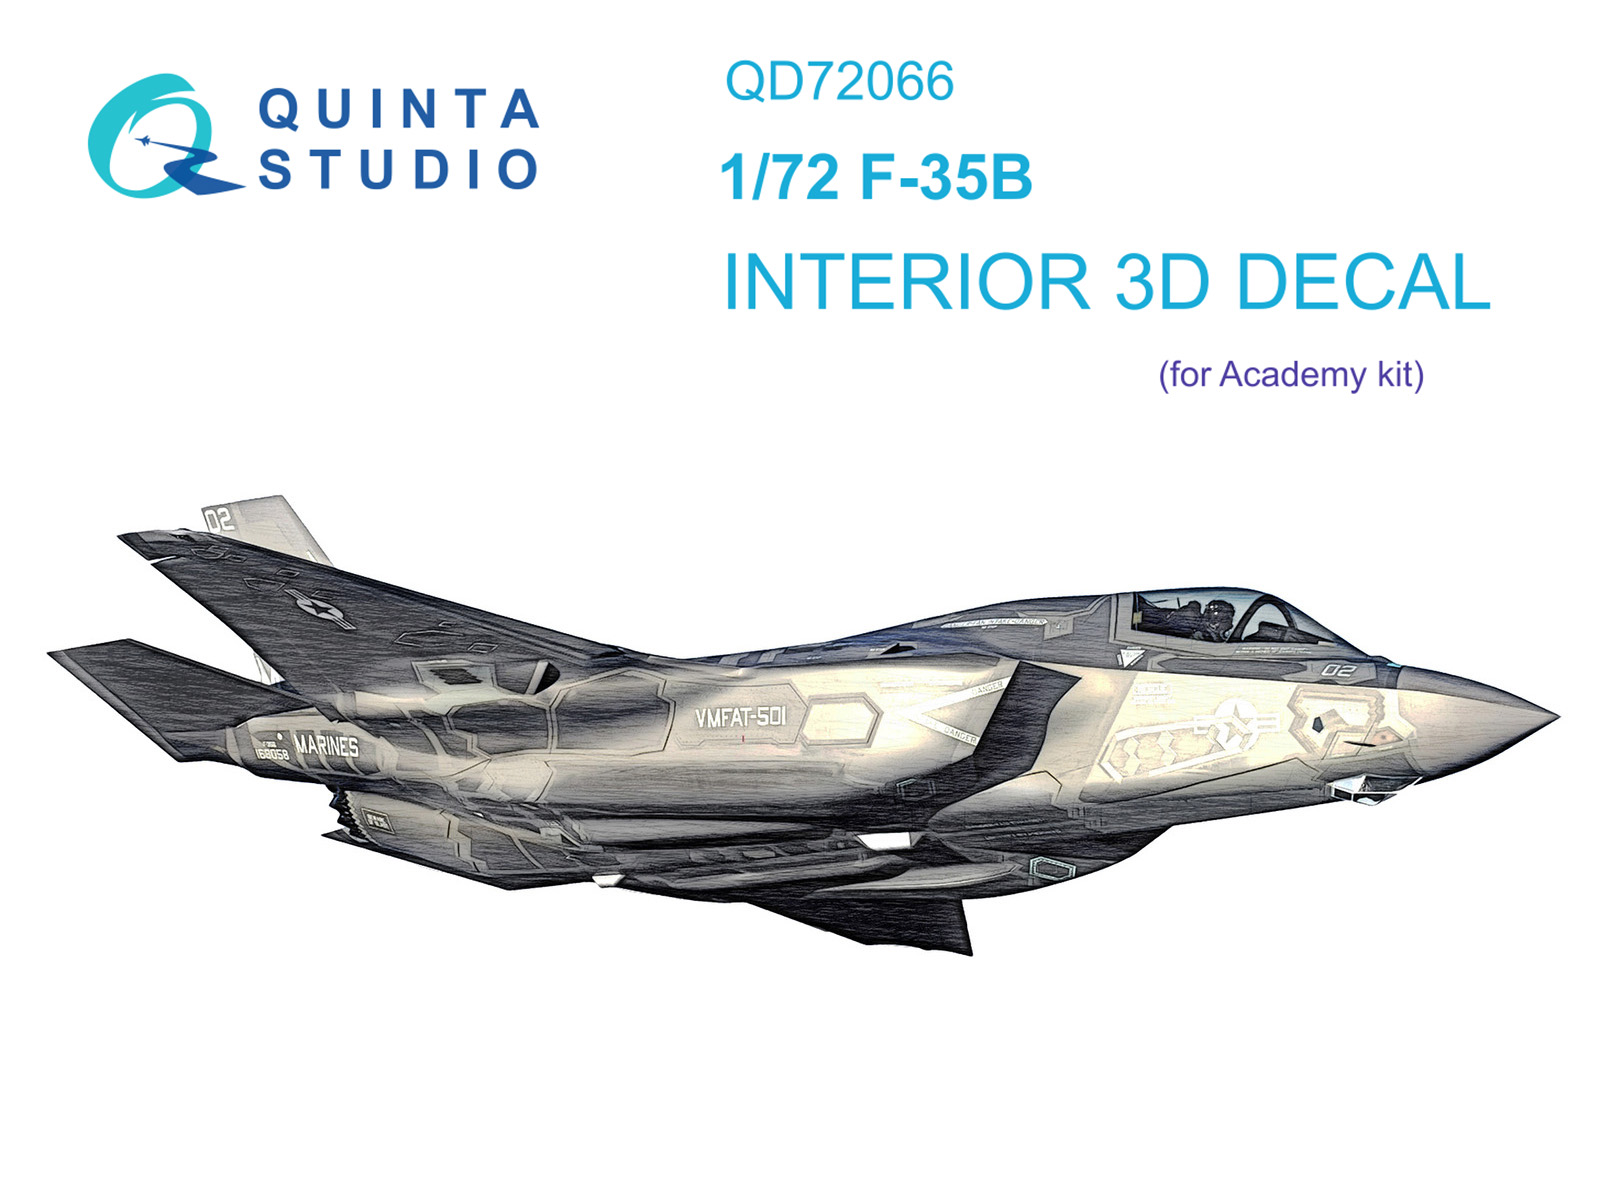 Quinta Studio 1/72 F-35B 3D Interior decal #72066 (for Academy Kit)